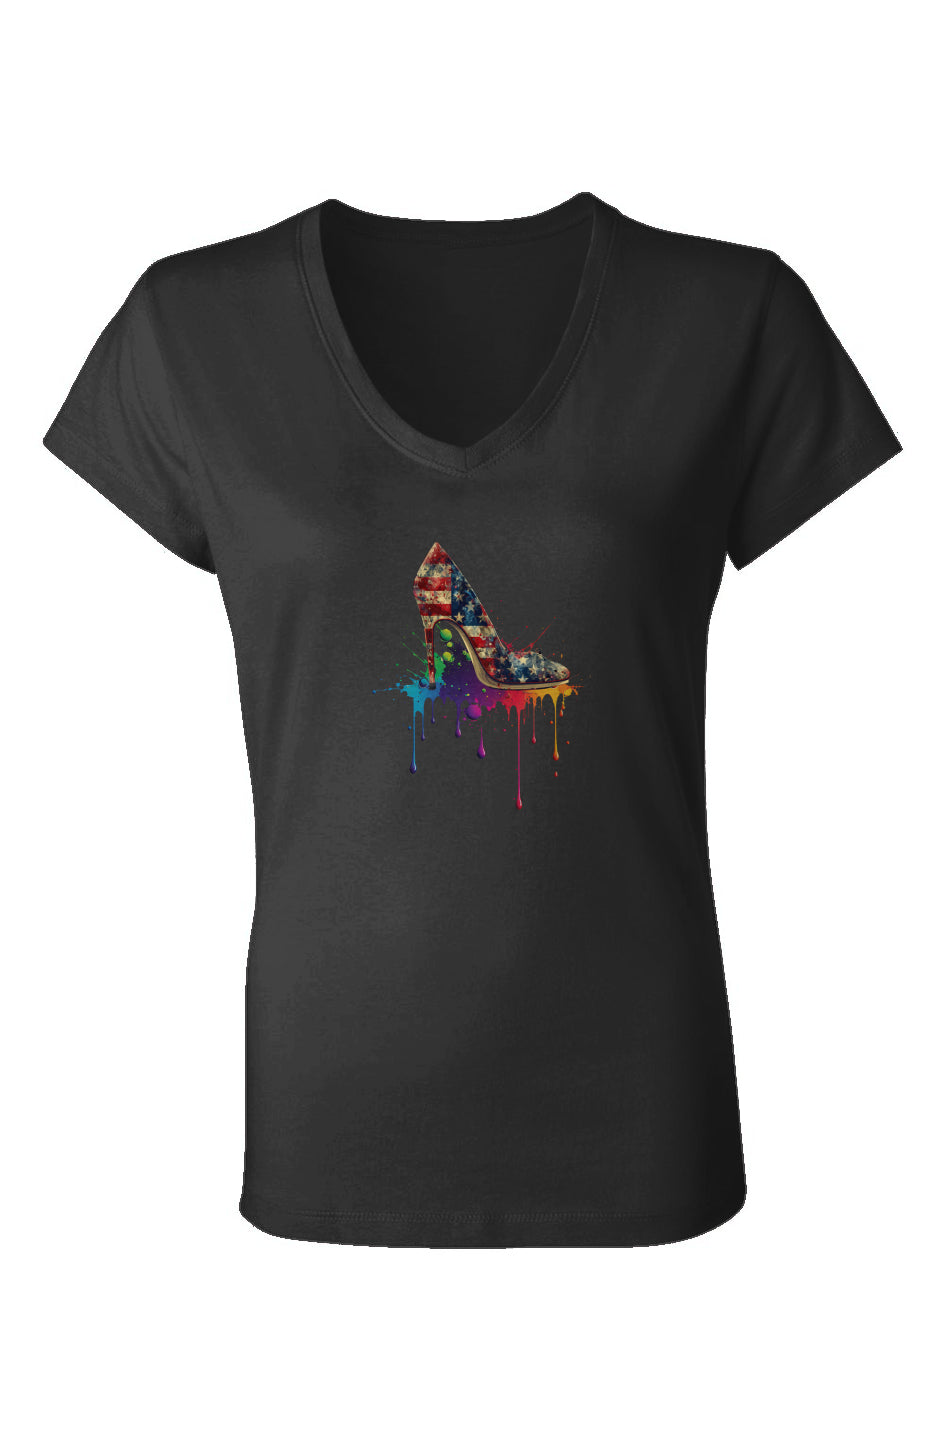 Ladies Jersey V-Neck T-Shirt splash of color with the high heels